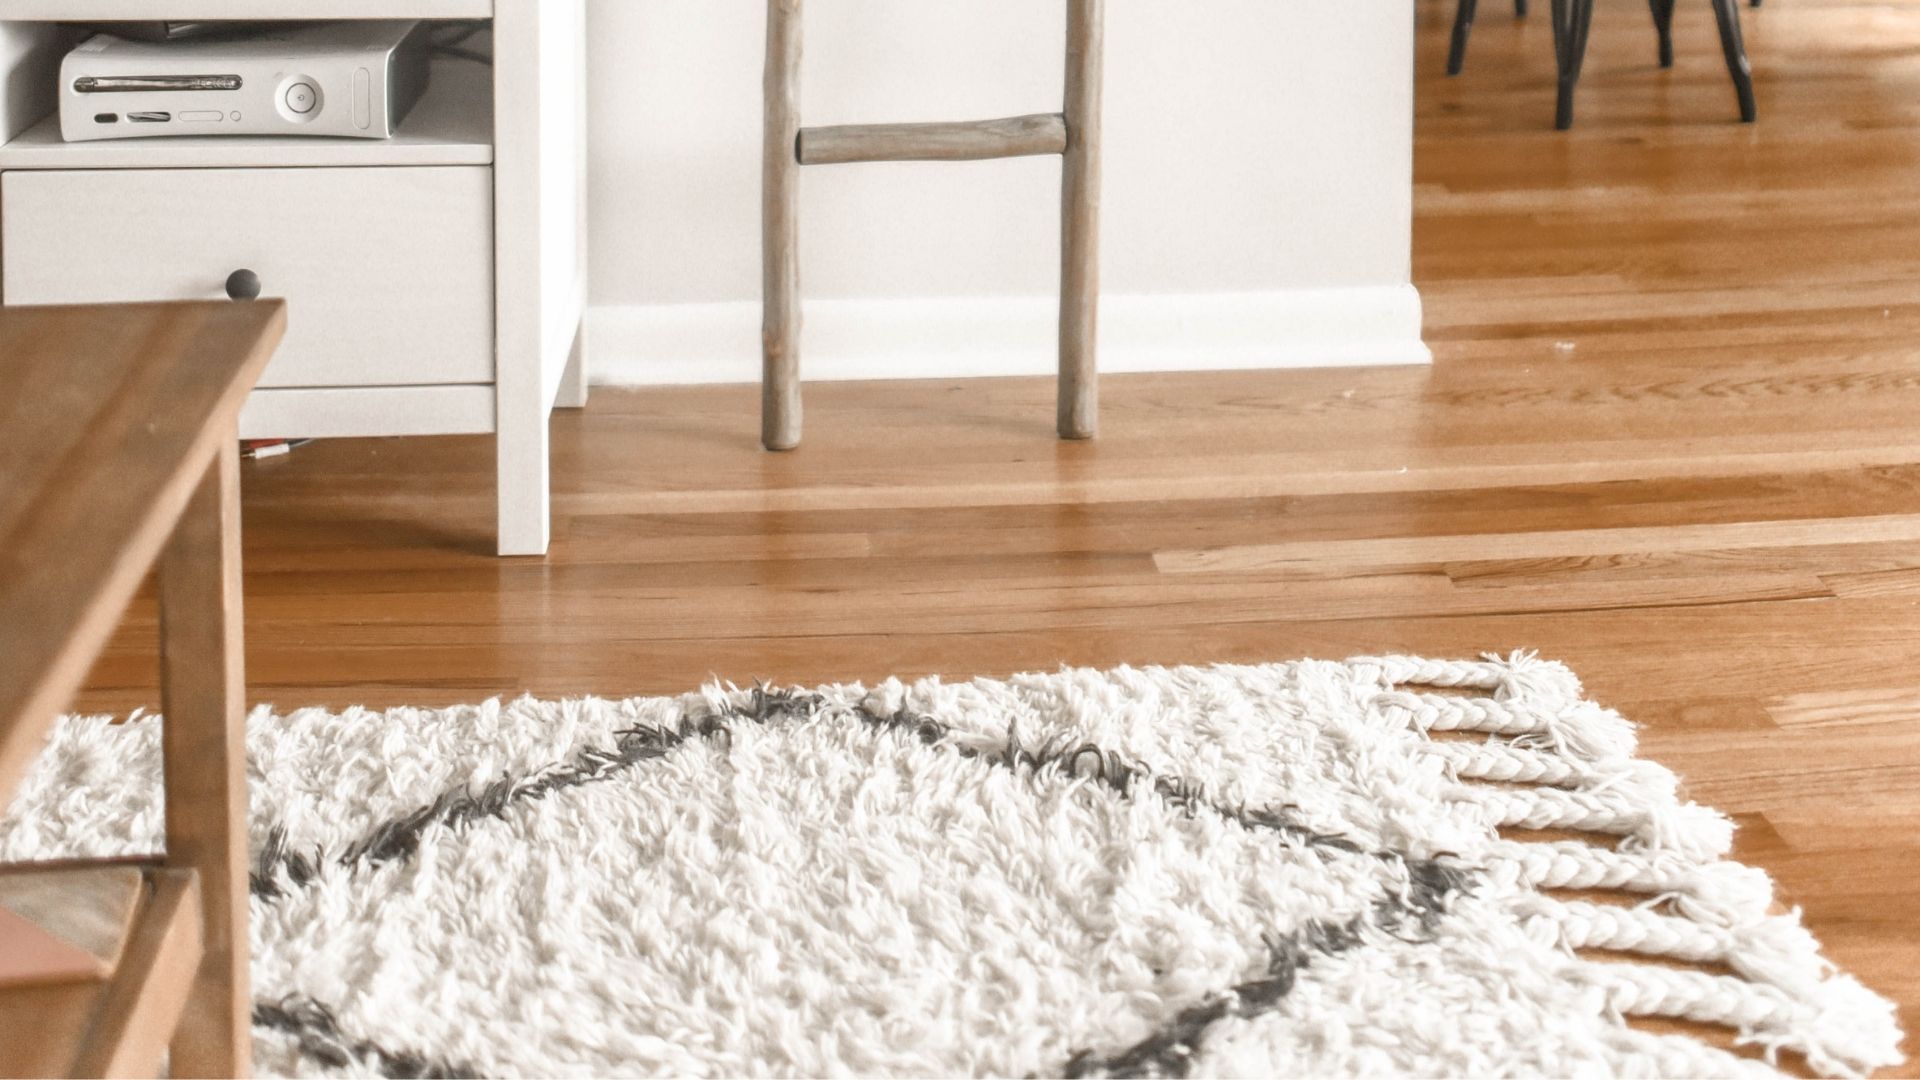 How To Disinfect Carpets Without A Steam Cleaner